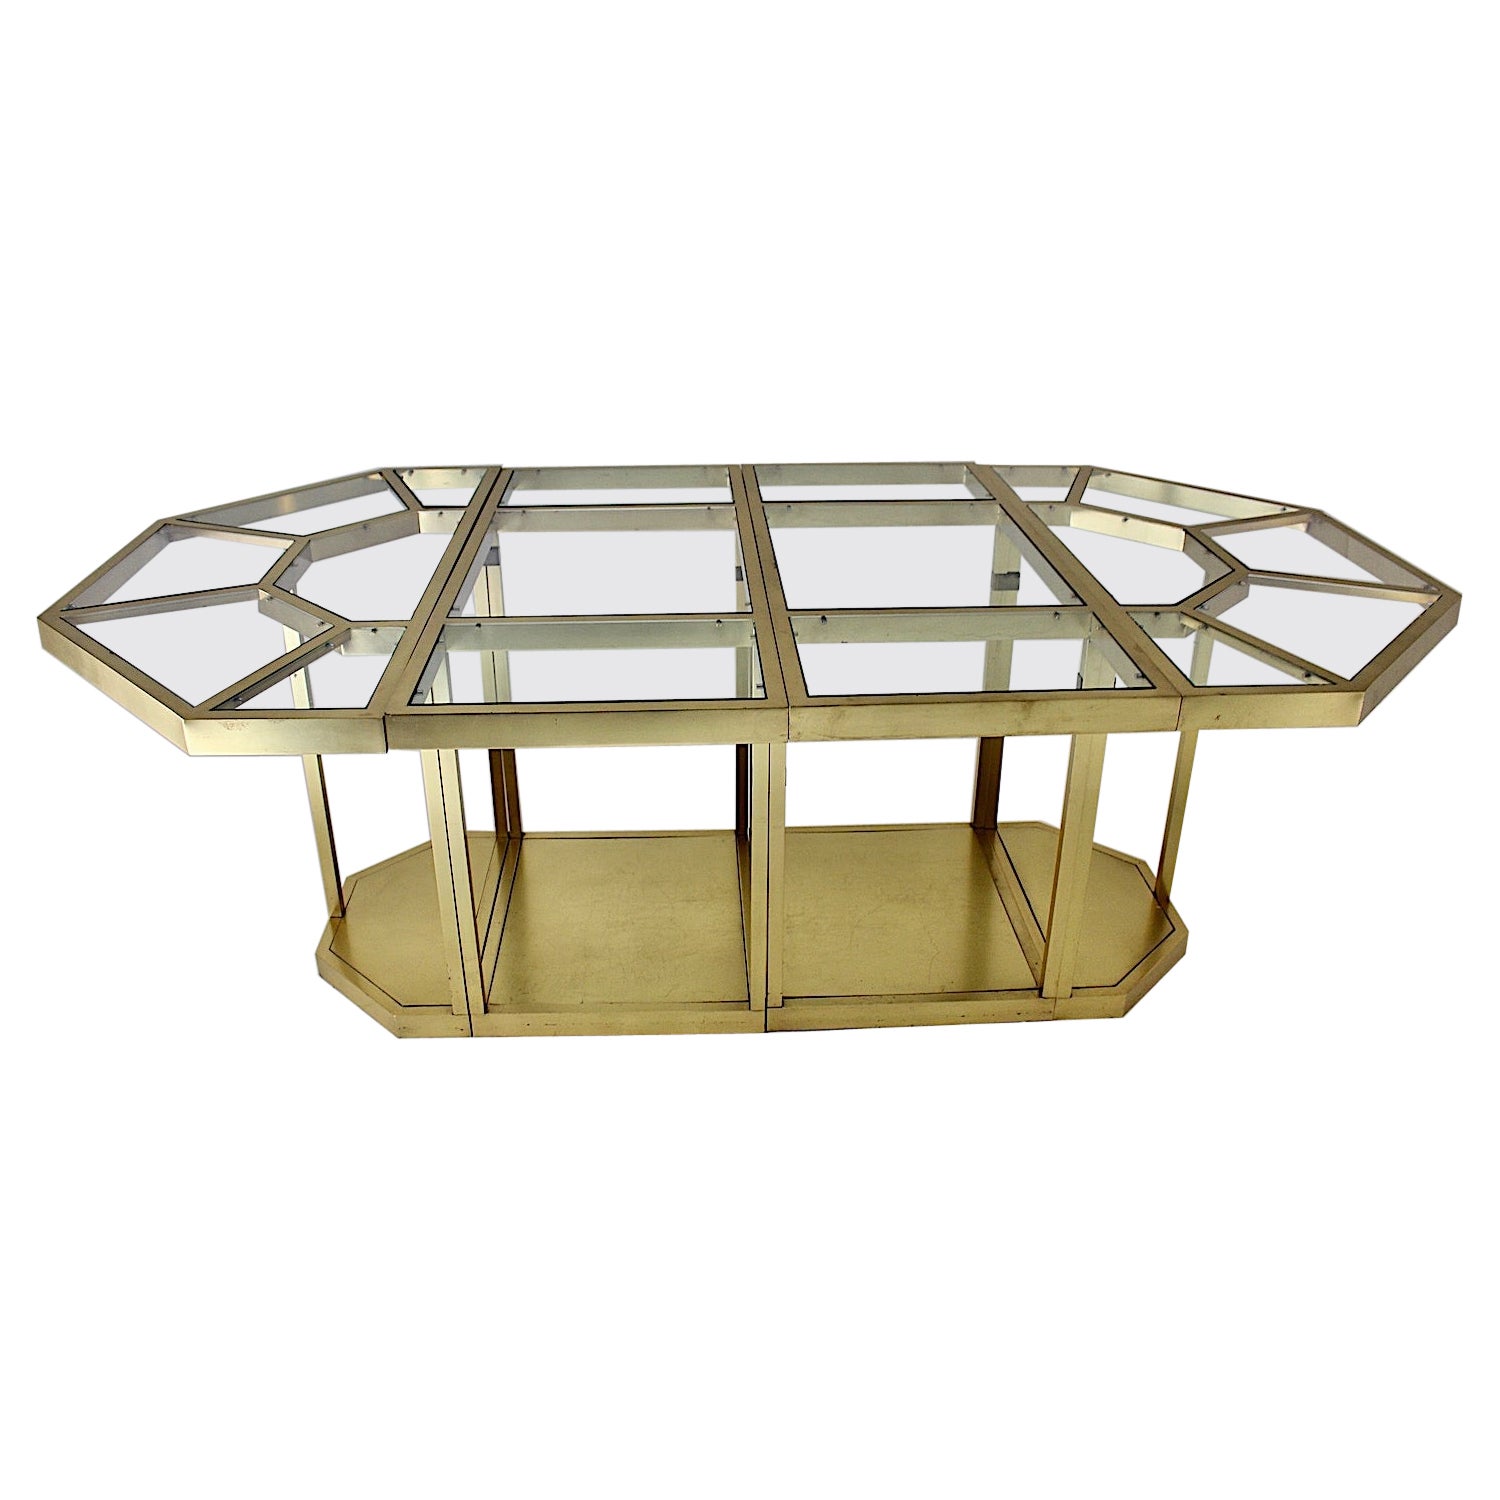 Hollywood Regency Style Dining Table Gabriella Crespi Style Brass Glass Italy